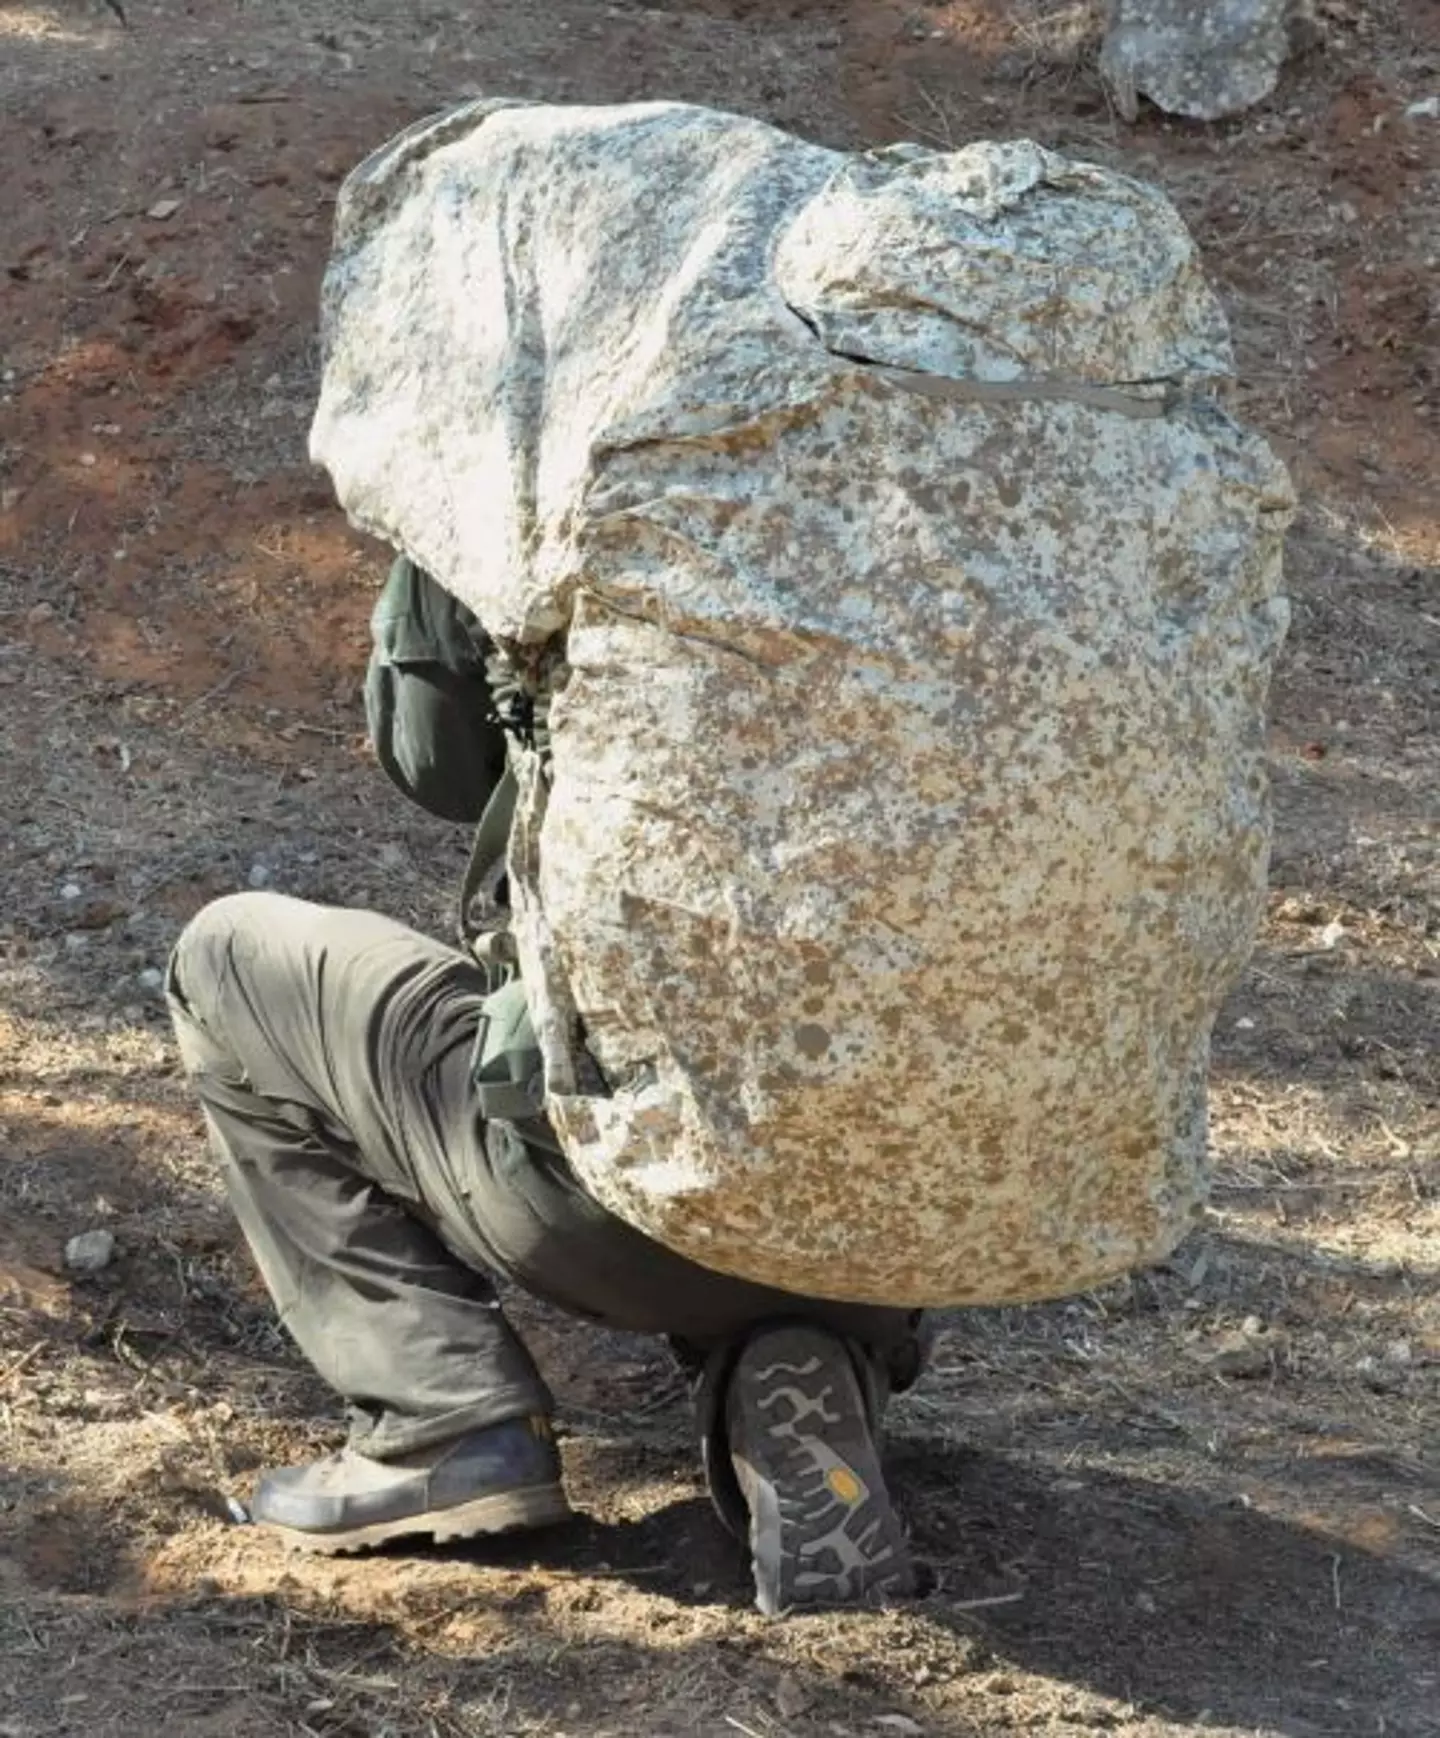 The Kit 300 is designed to mask a person's body heat and disguise them as a rock.